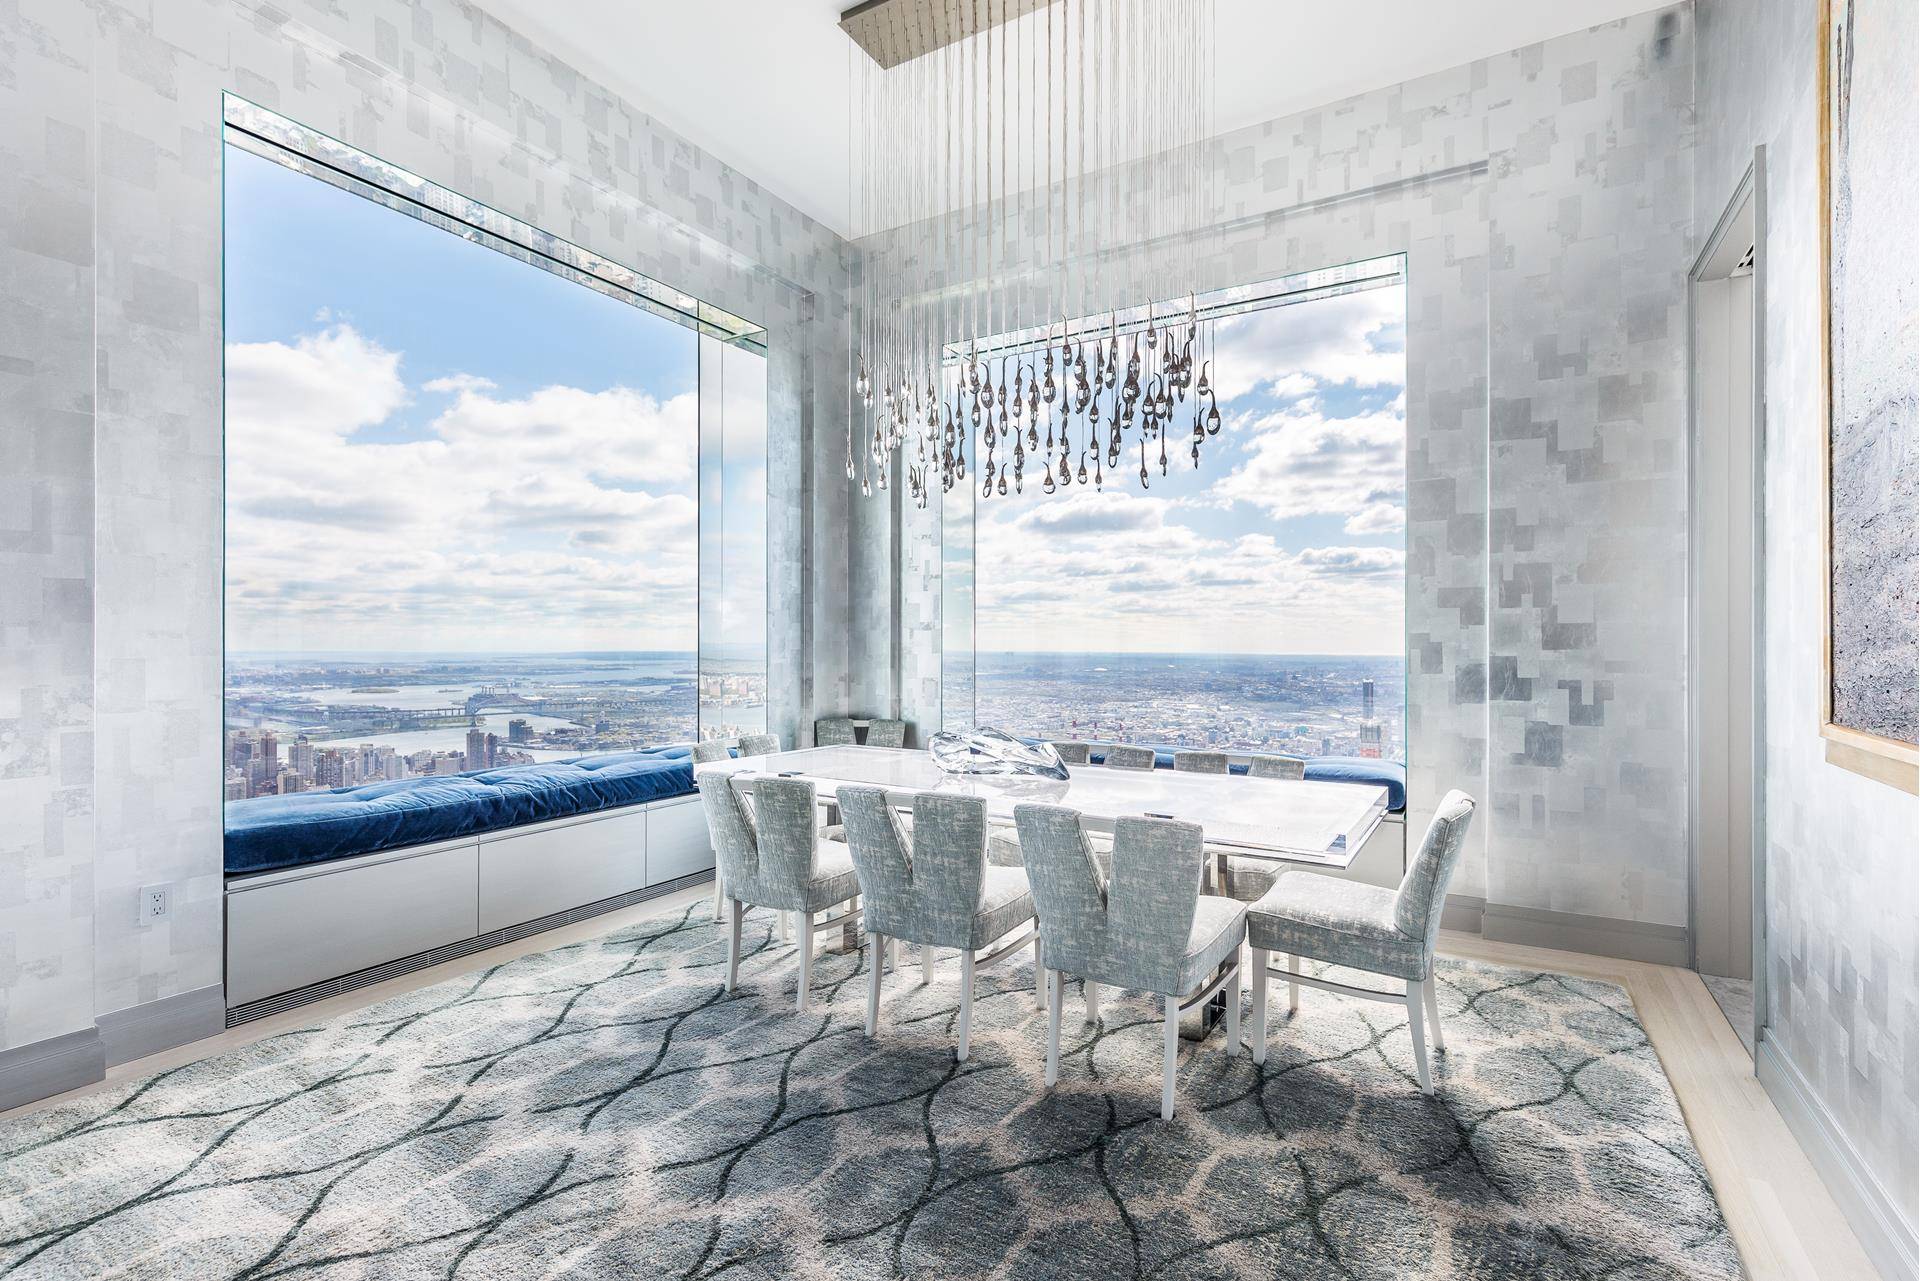 This residence, located on a high floor of iconic 432 Park Avenue, designed by architect Rafael Violy, has recently been converted from a three bedroom unit to an elegant two ...